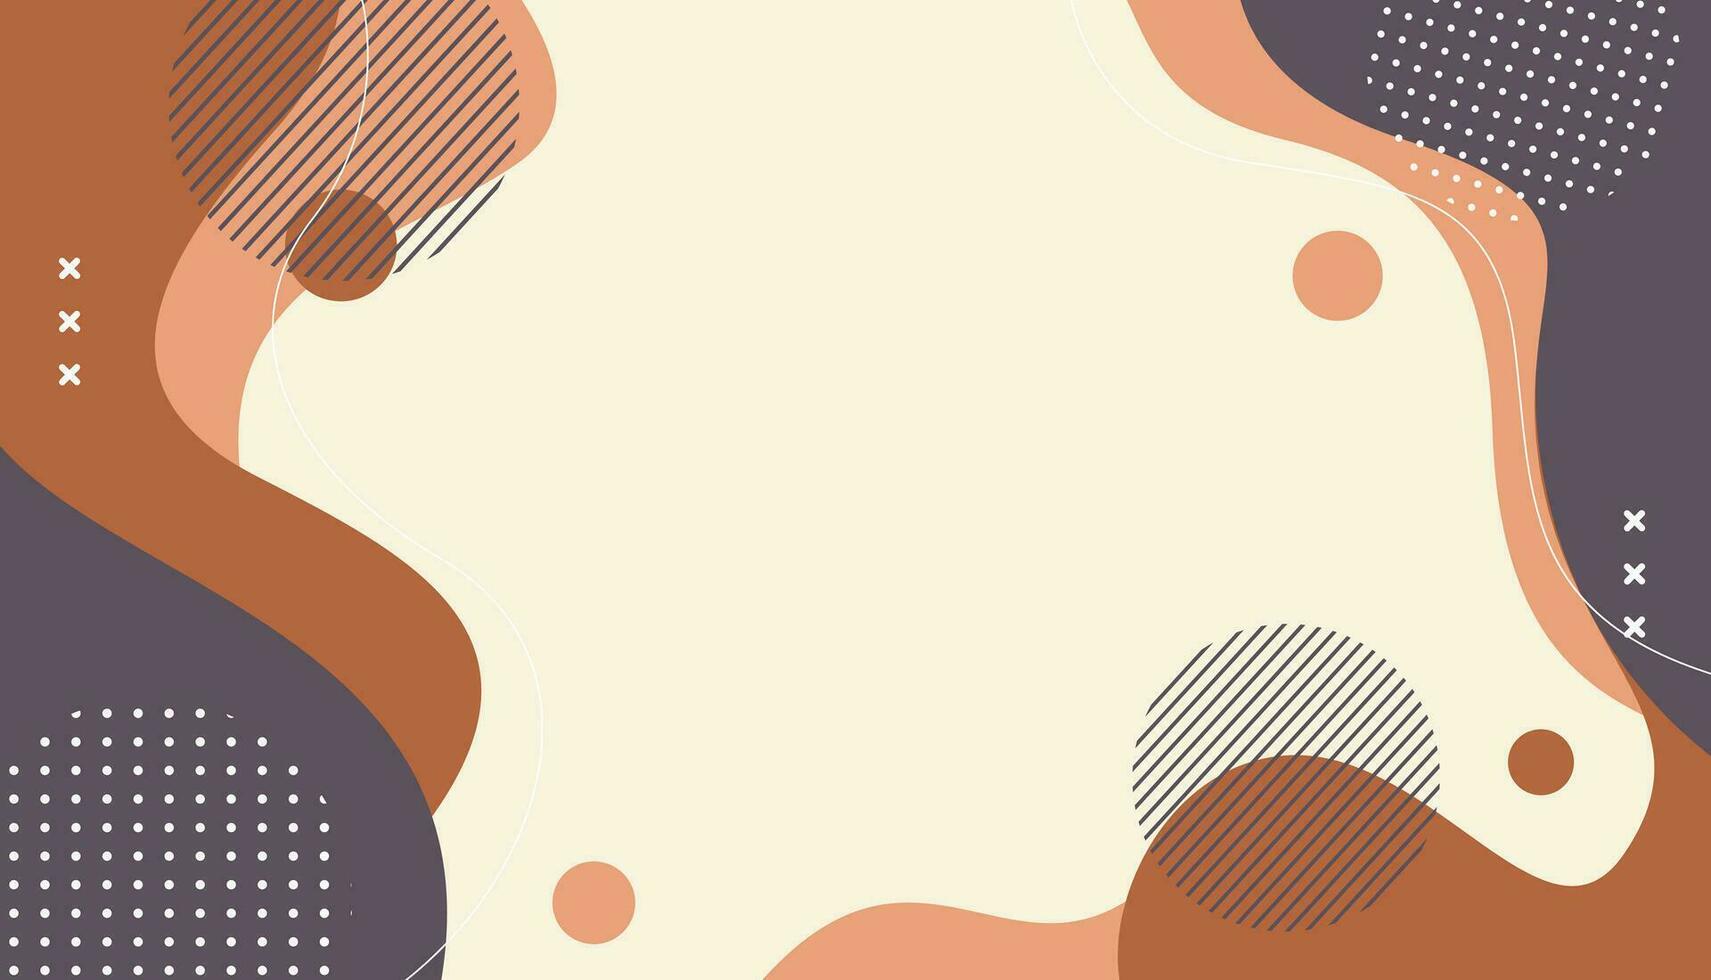 Abstract background minimalist, hand drawn with geometric and organic shapes in different shades of brown. simple trendy flat vector illustration, Free vector Free Vector